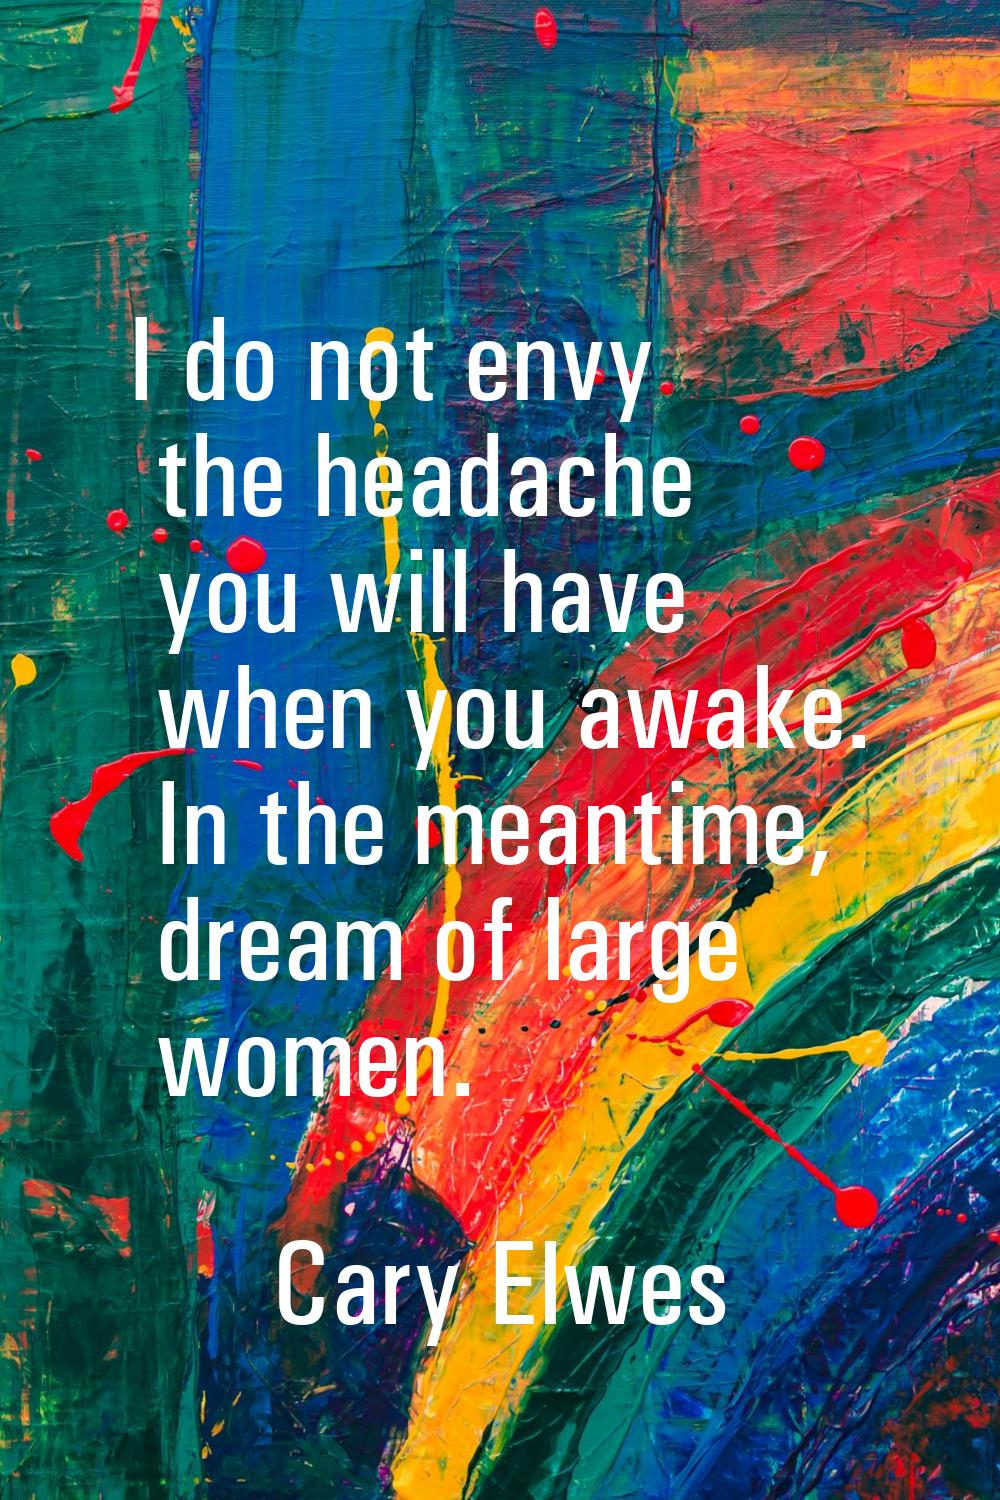 I do not envy the headache you will have when you awake. In the meantime, dream of large women.